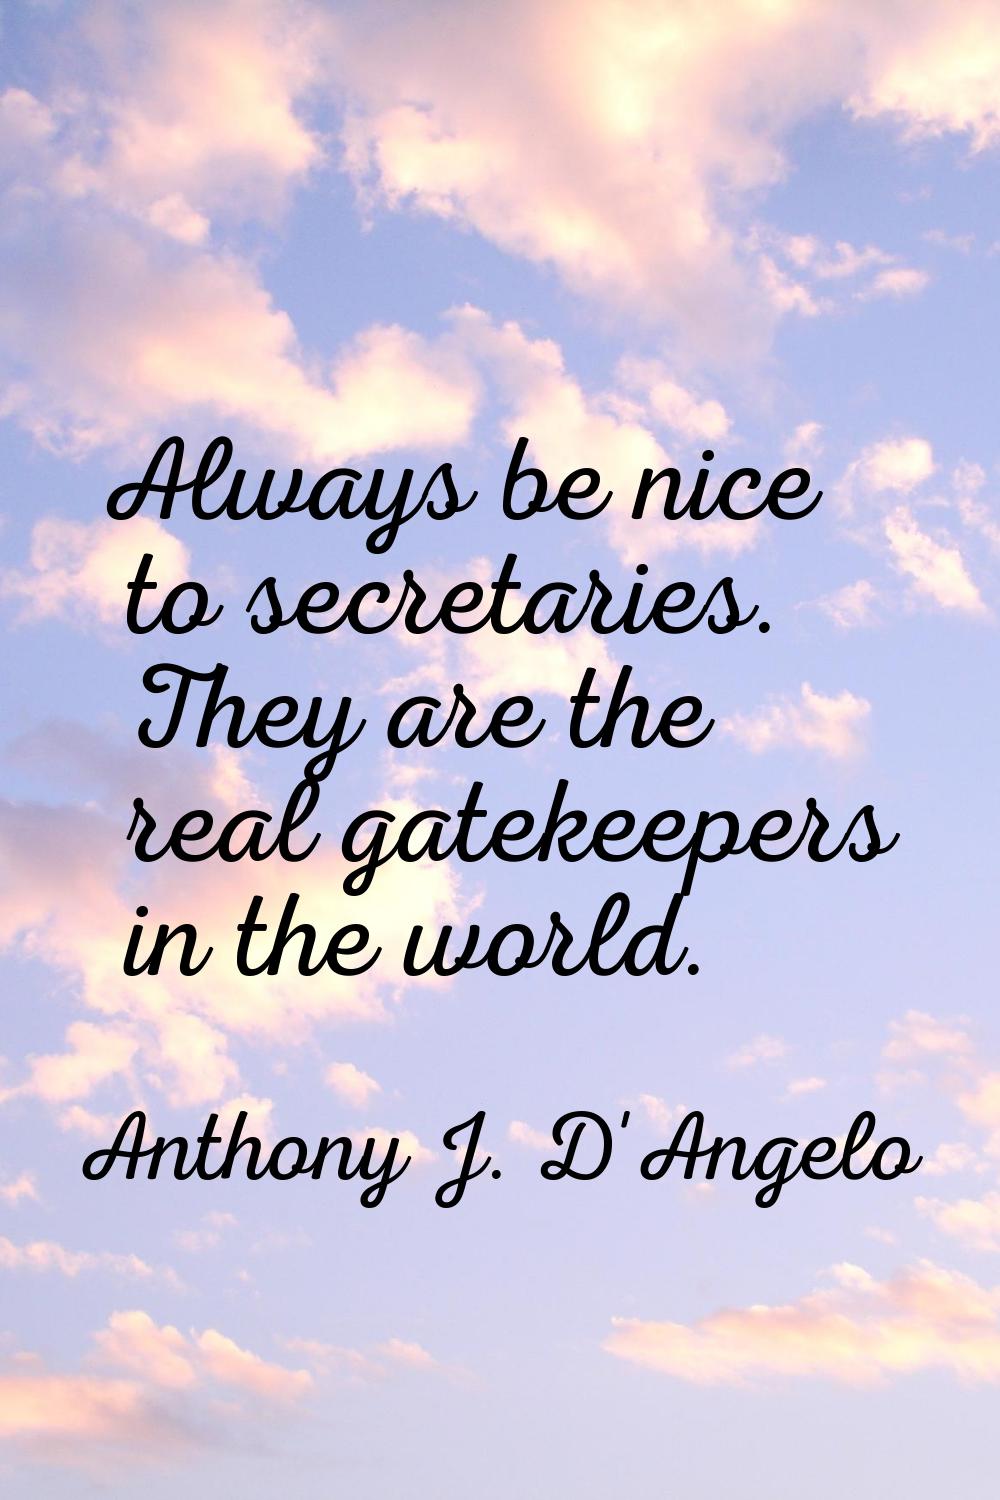 Always be nice to secretaries. They are the real gatekeepers in the world.